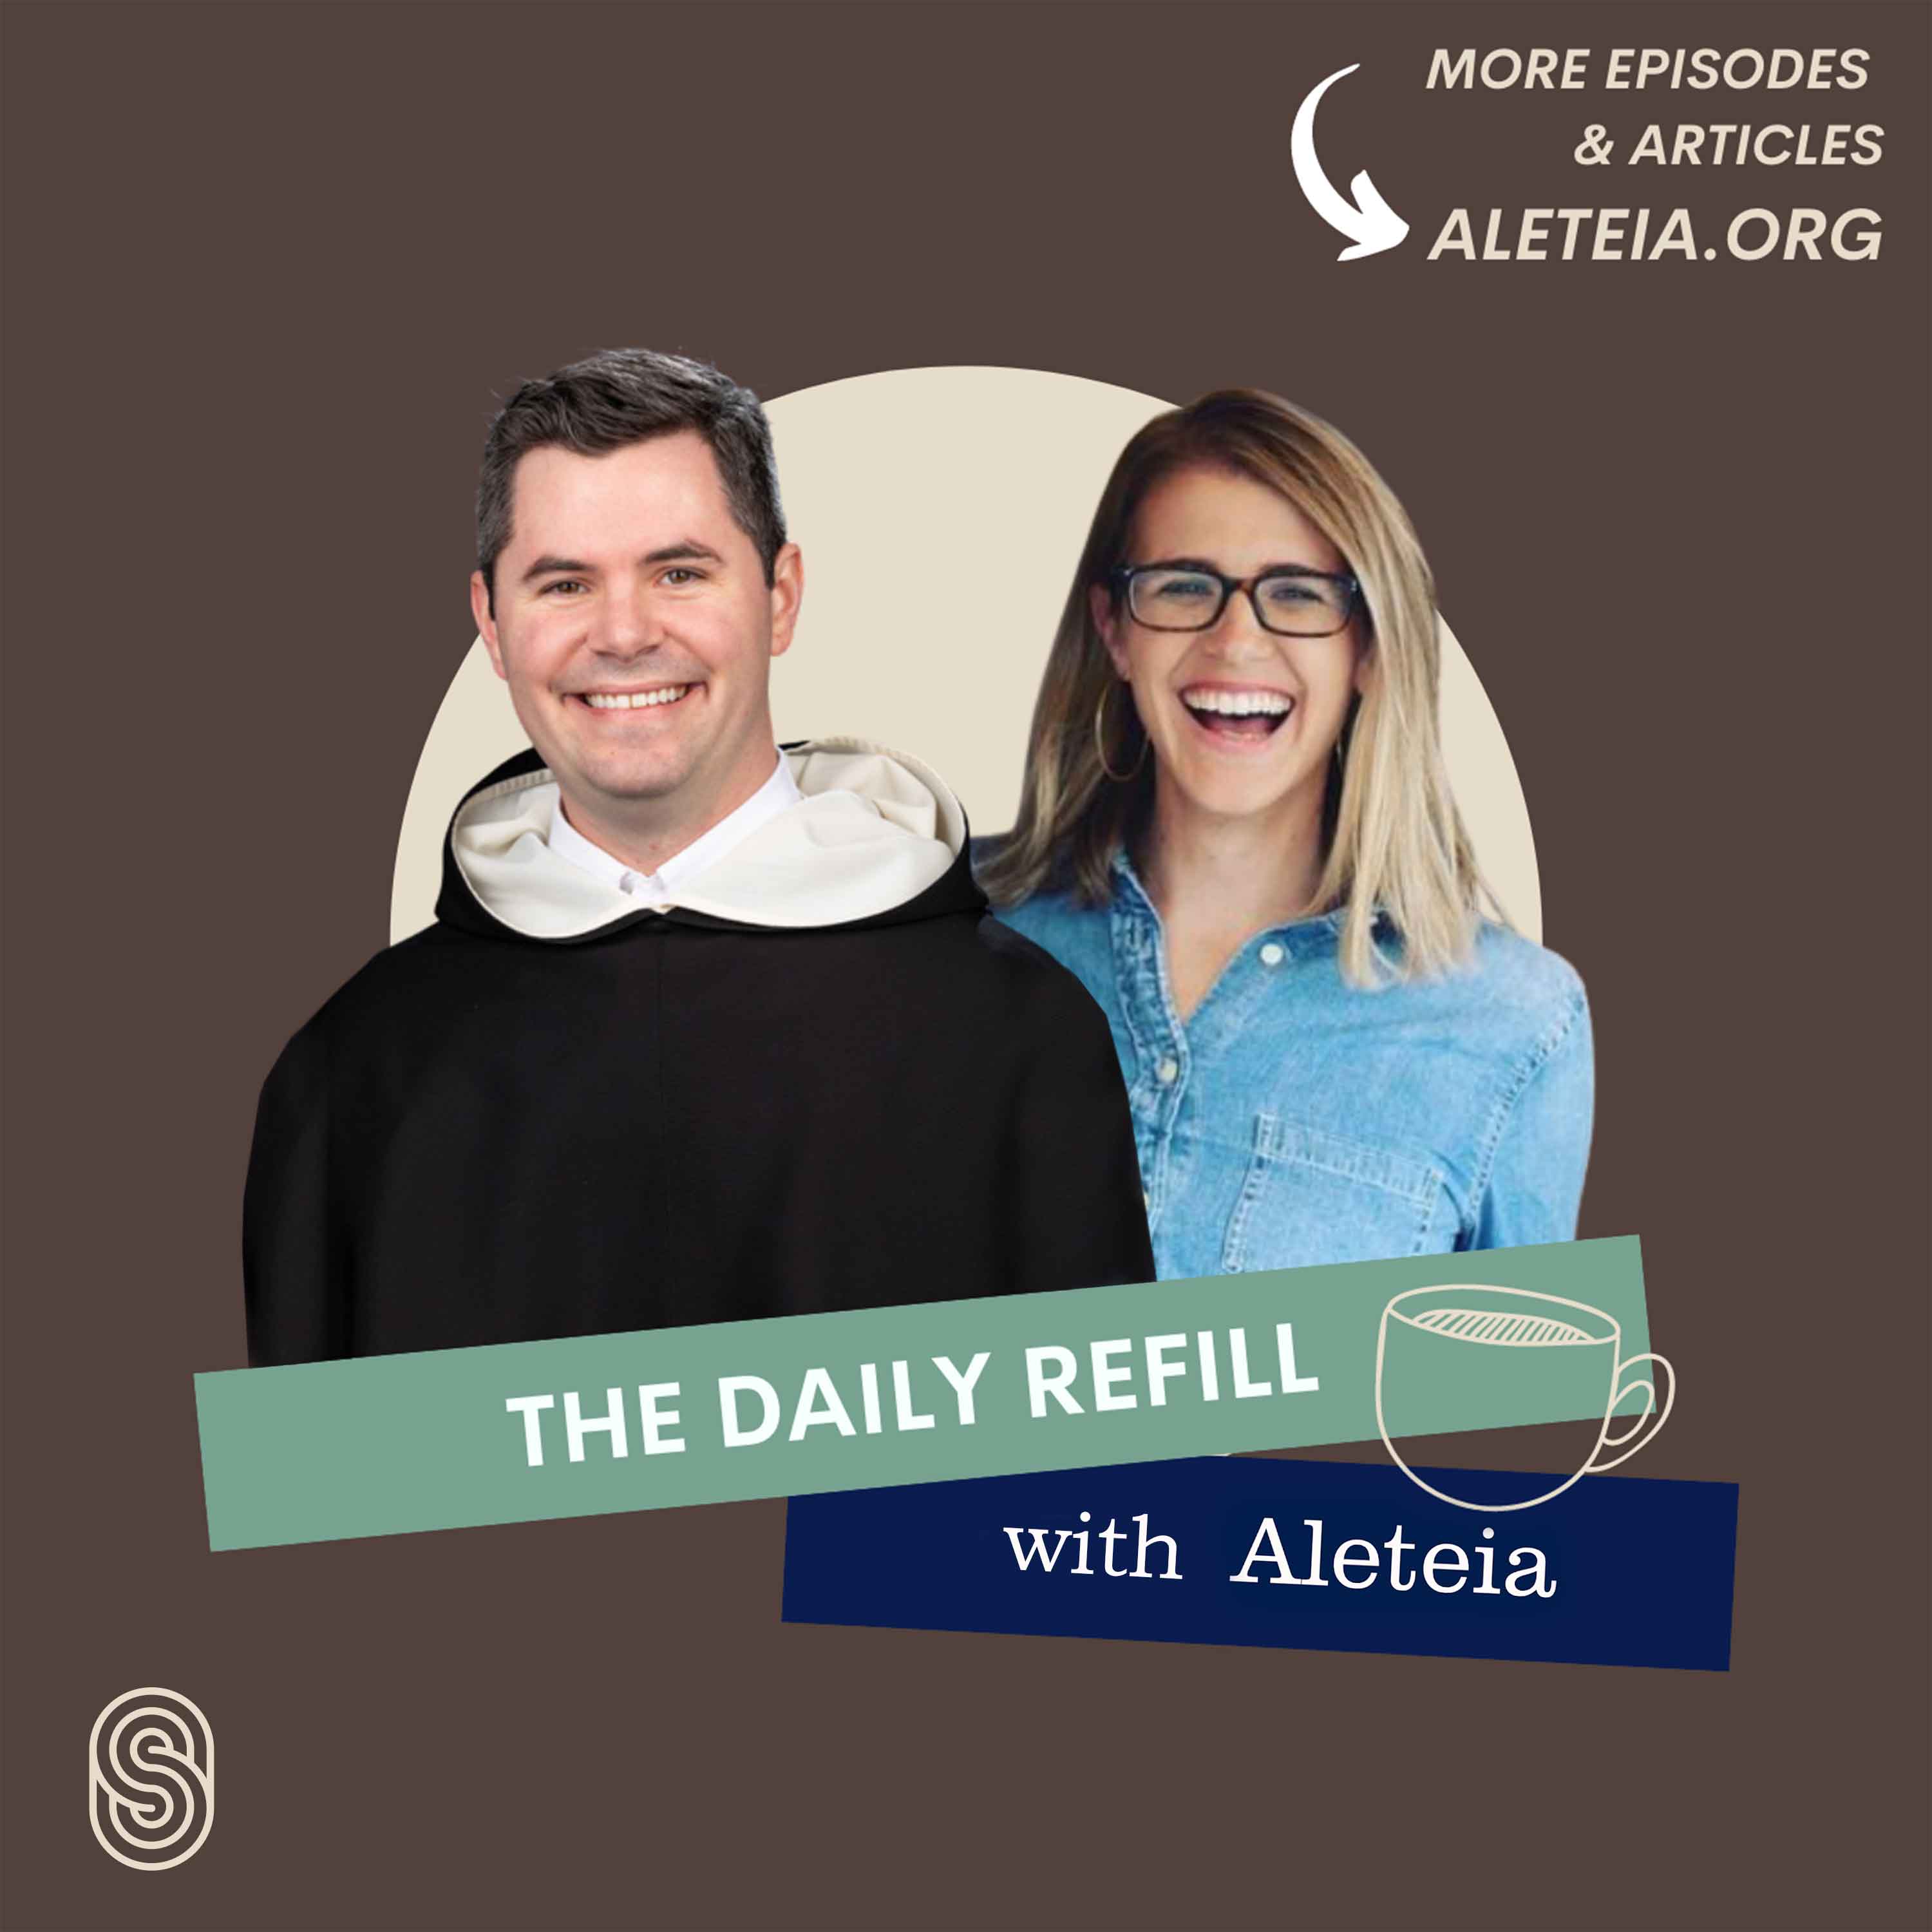 Artwork for podcast The Daily Refill with Aleteia